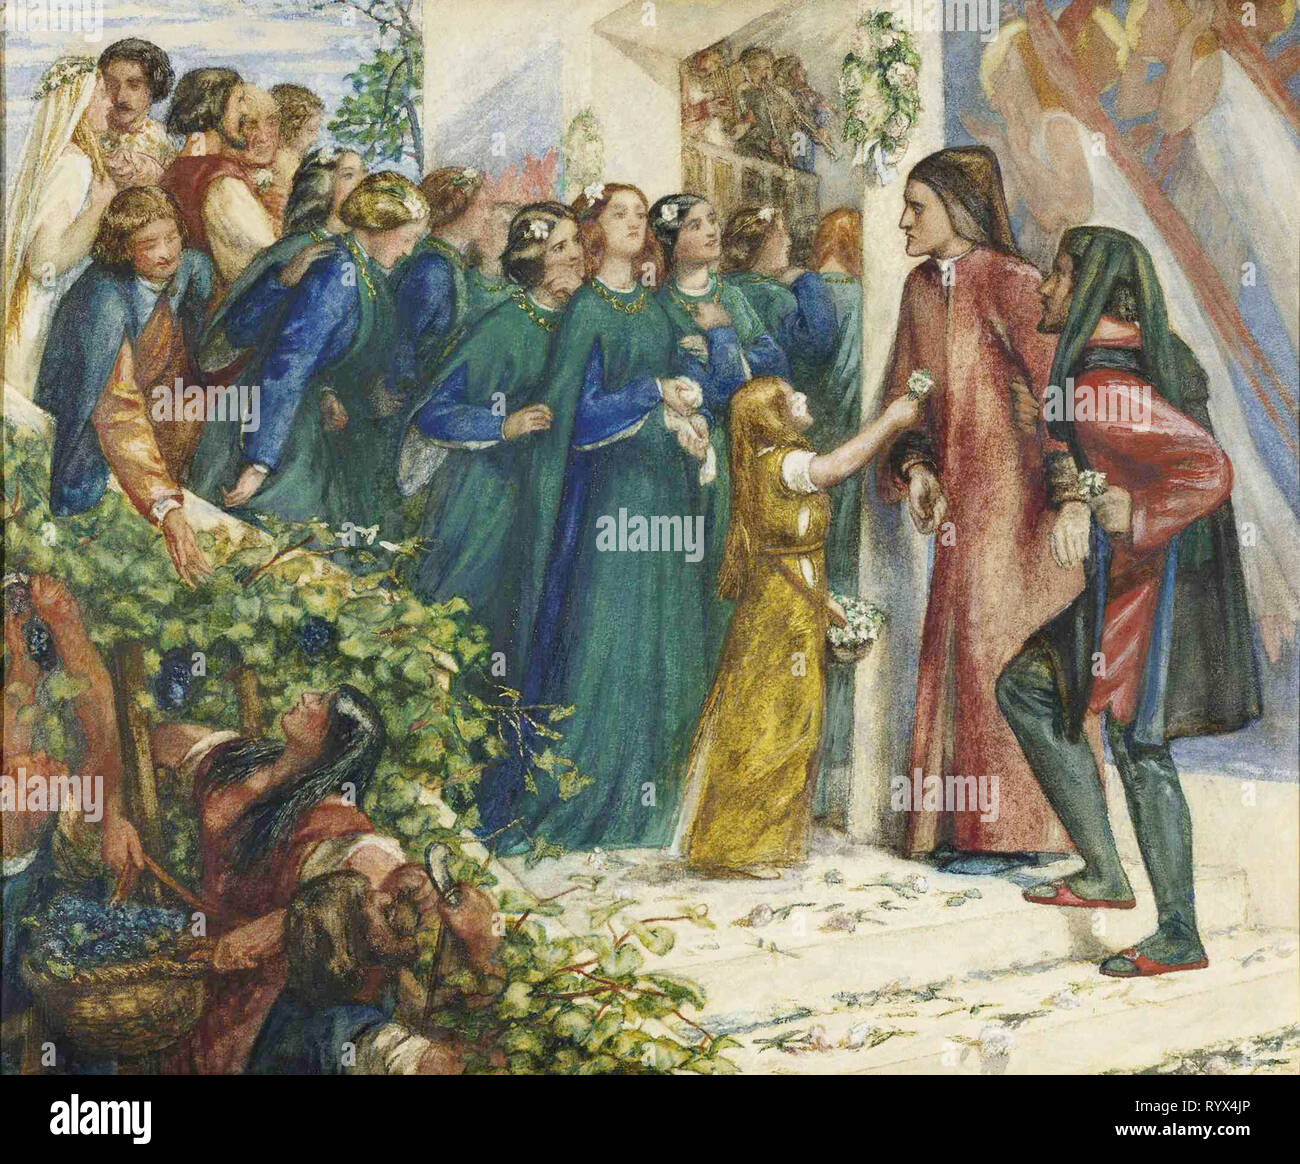 Artist : Dante Gabriel Rossetti (England, b.1828, d.1882)   Title : Beatrice meeting Dante at a marriage feast, denies him her salutation  Date : 1852  Medium Description: watercolour and bodycolour on paper  Dimensions :   Credit Line : Purchased with funds provided by John Schaeffer 2003  Image Credit Line :   Photographer Credit :   Accession Number : 431.2003 Stock Photo